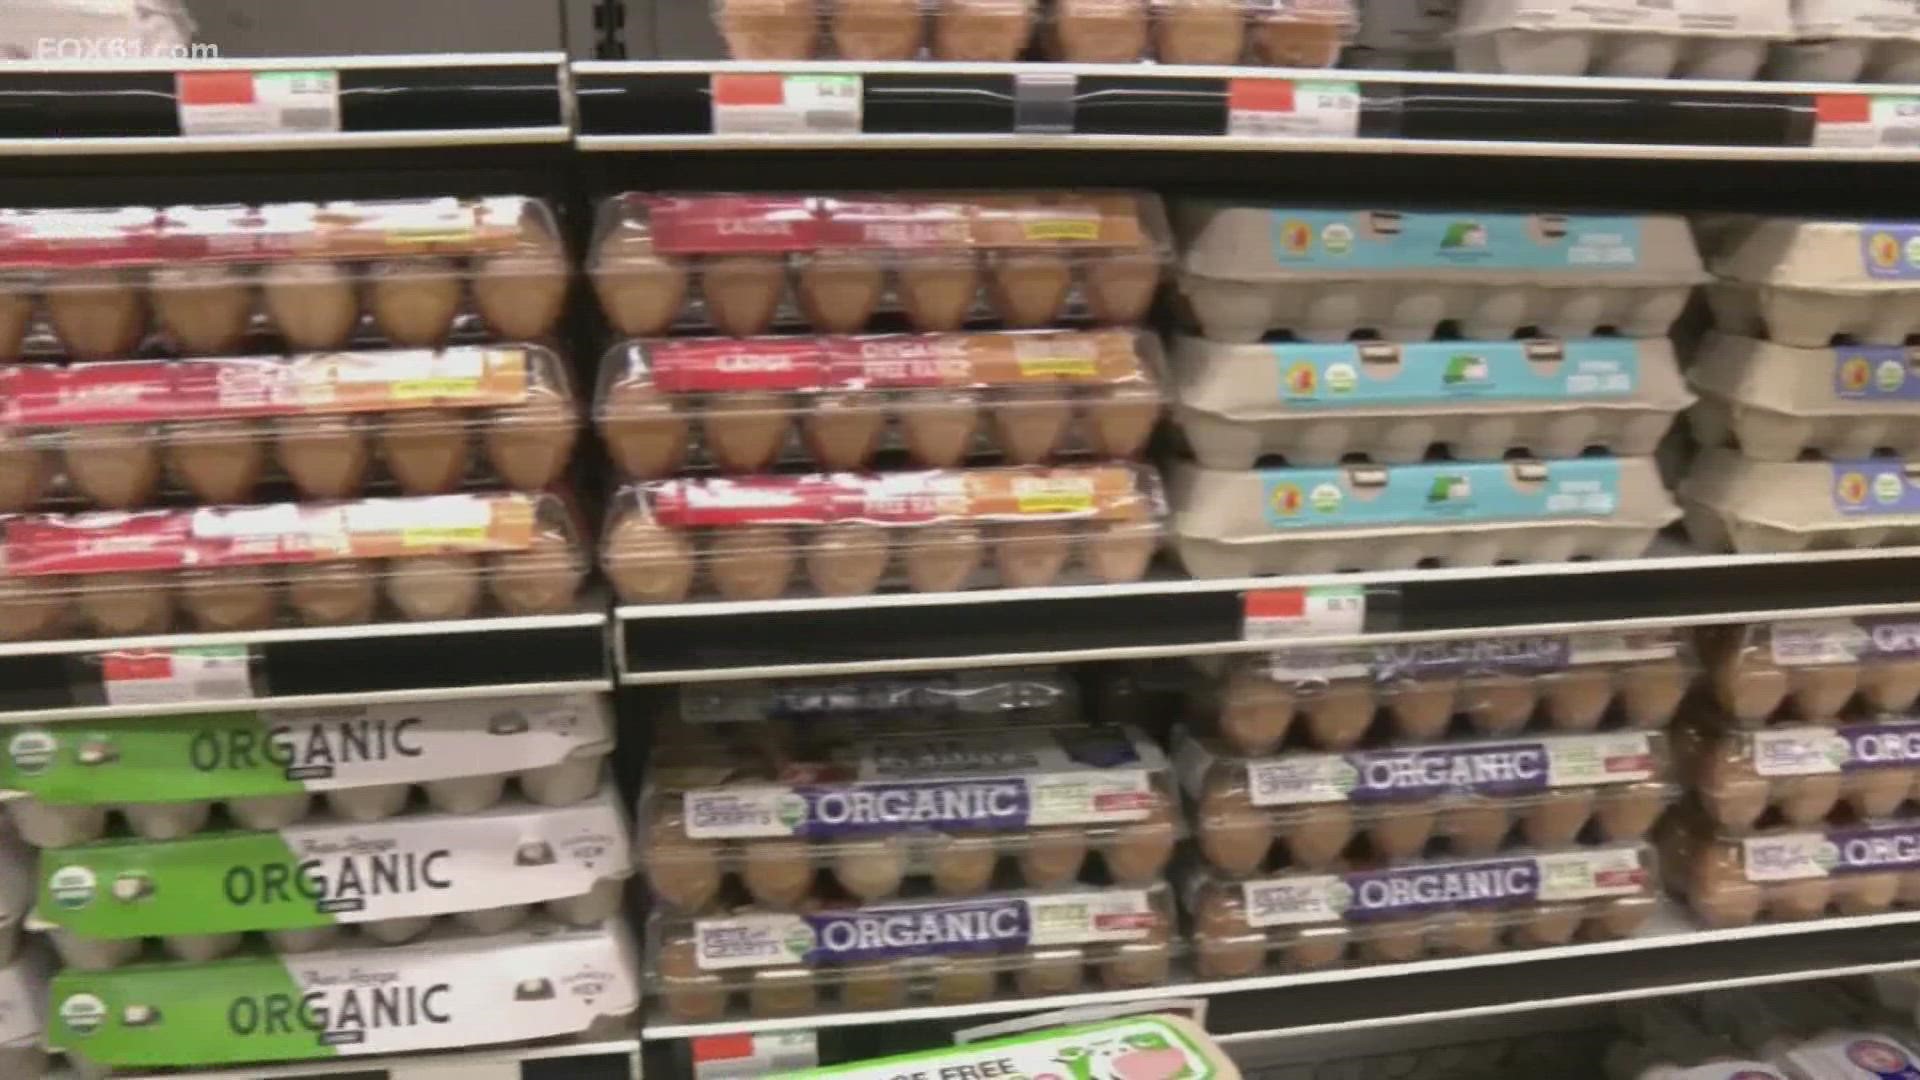 Connecticut shoppers have shelled out more money in the last few months due to the increase in food prices, especially eggs, but relief is on the way.